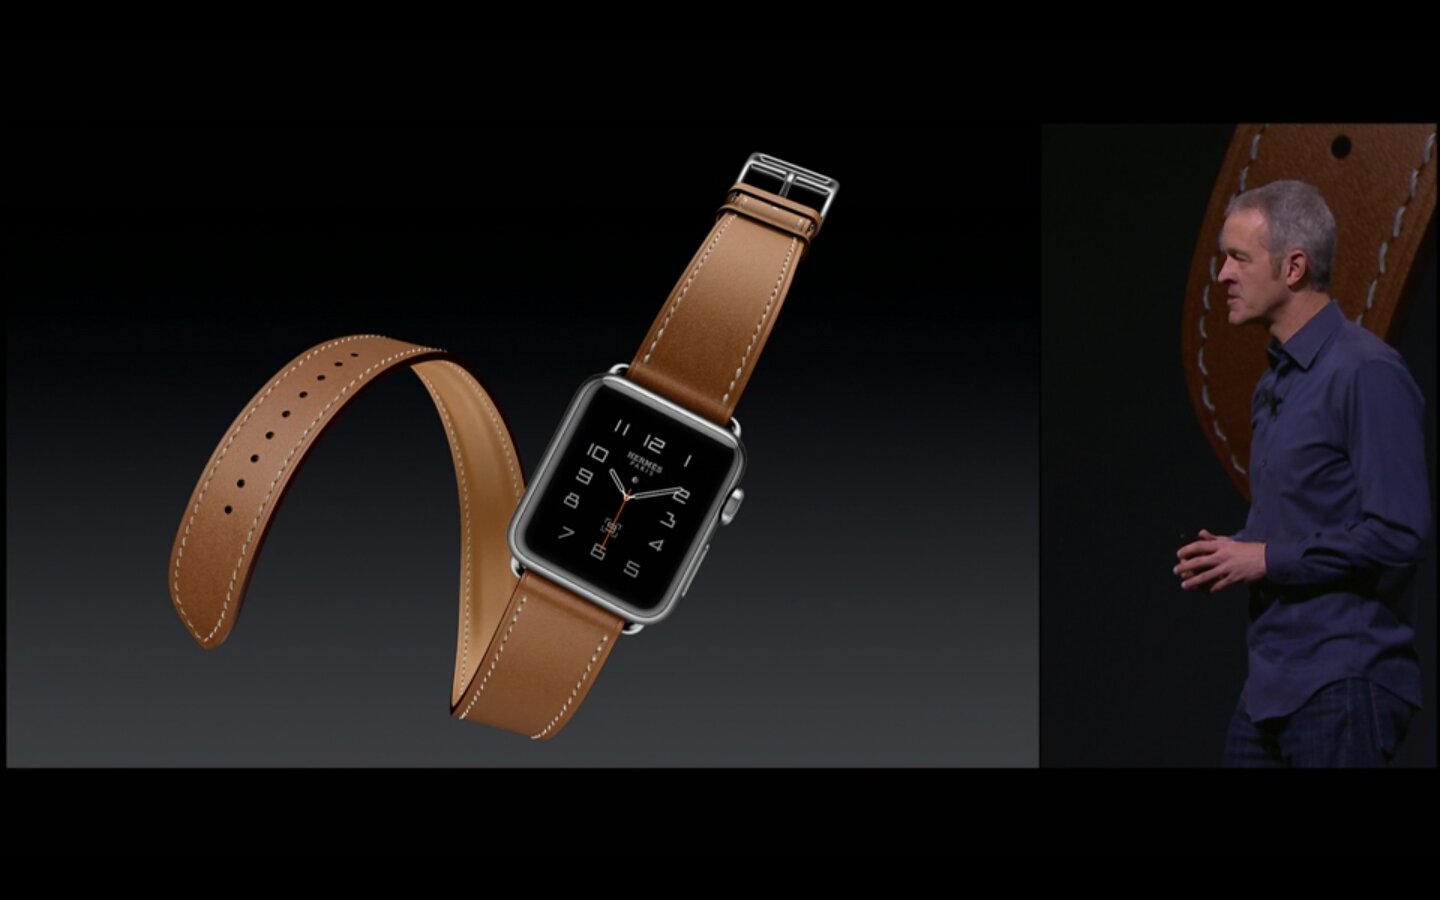 apple-watch-Hermes-luxury-smartwatch-high-end-name-brand-apple-launch-event-2015